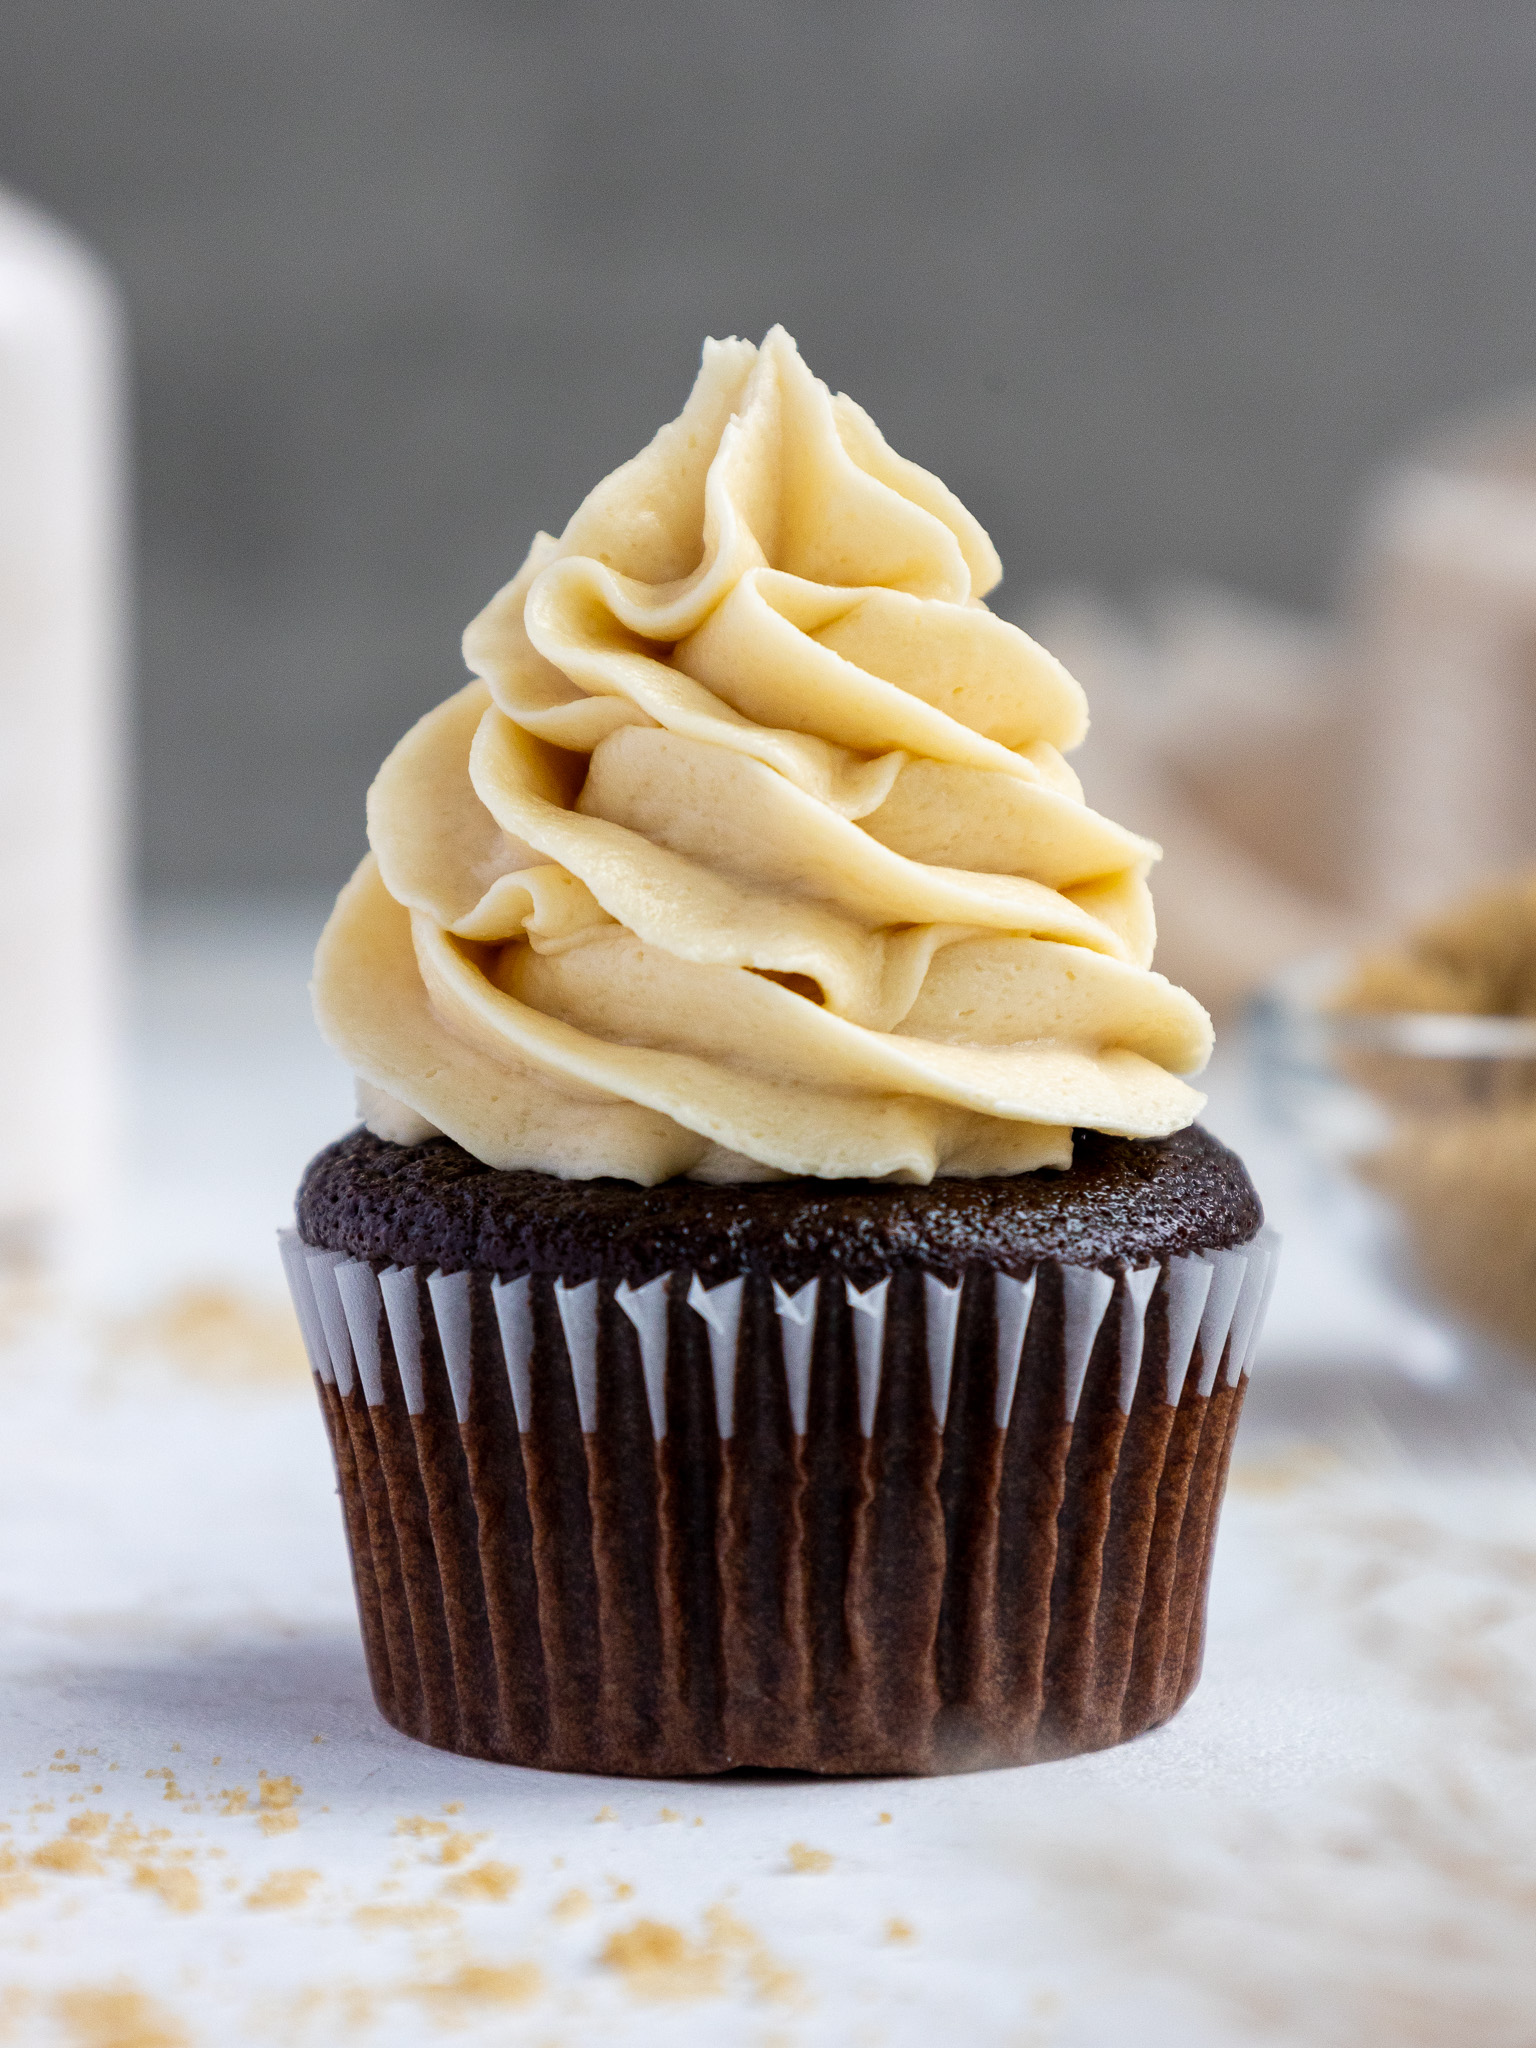 image of brown sugar frosting that's been piped onto a chocolate cupcake